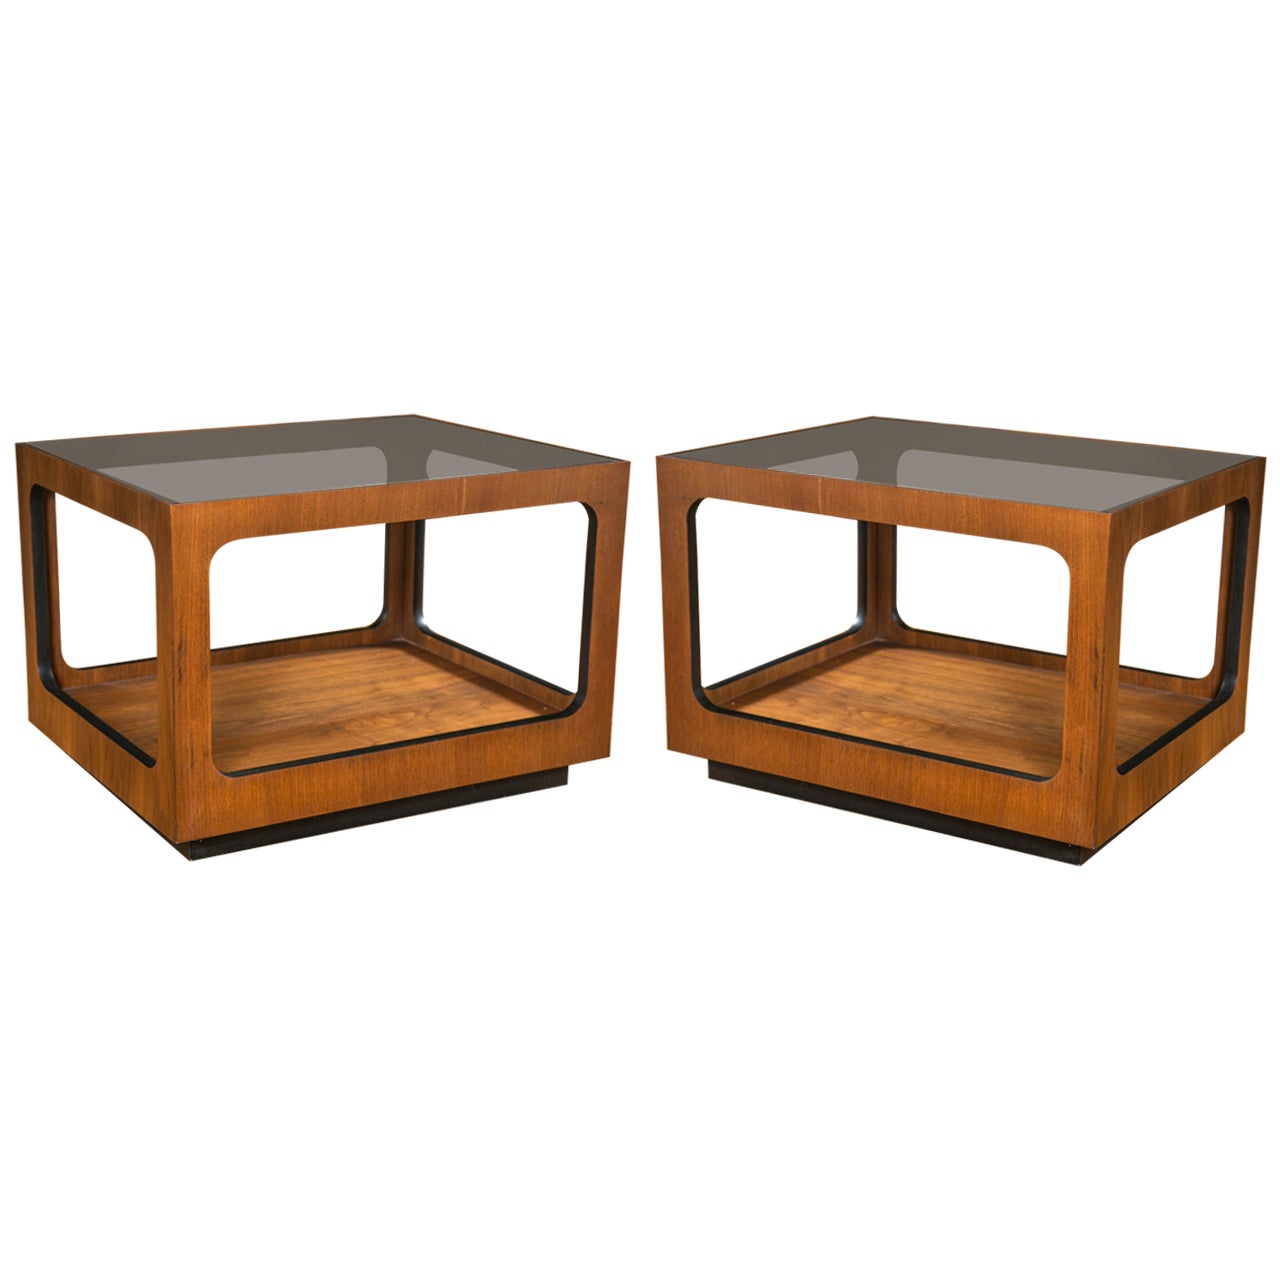 Pair of Mid-Century Rectangular Wood End Tables